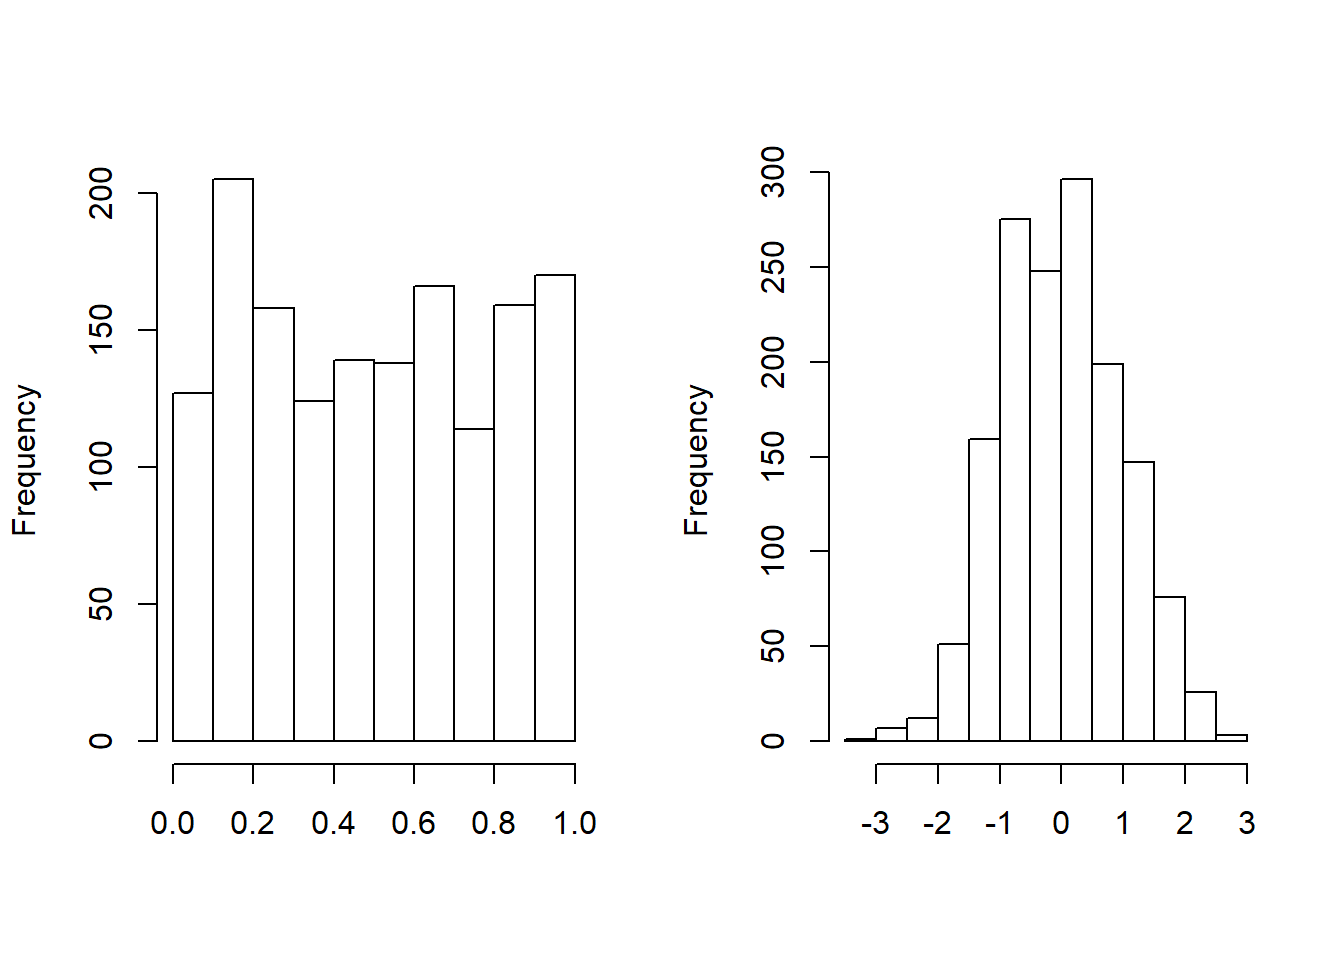 Histogram of Transformed Loss. The left-hand panel shows the distribution of probability integral transformed losses. The right-hand panel shows the distribution for the corresponding normal scores.